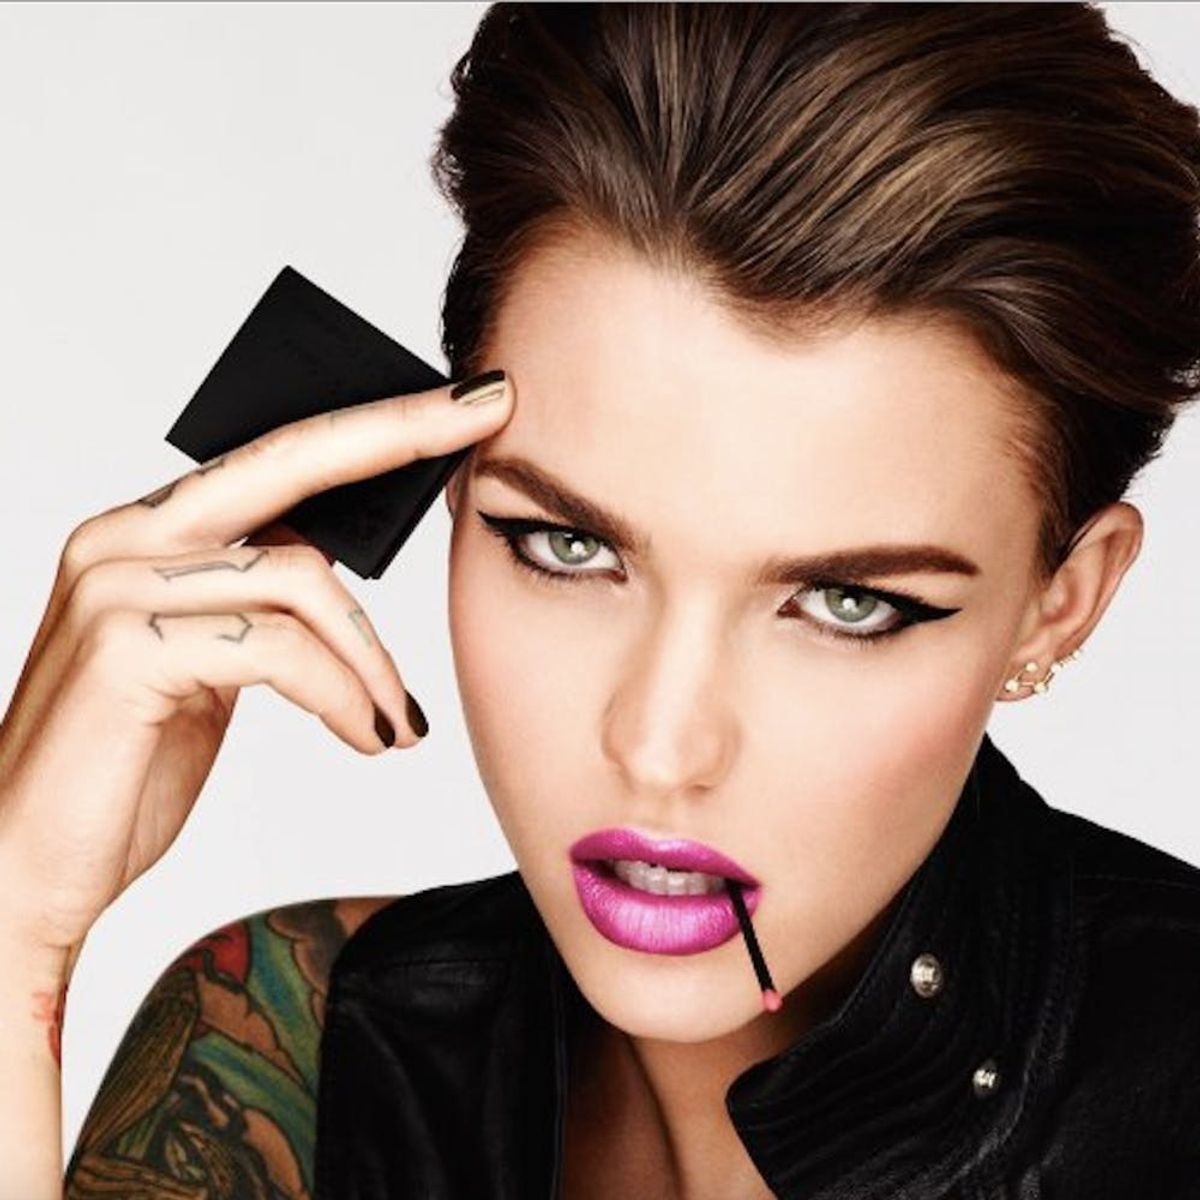 Ruby Rose and Urban Decay Are a Match Made in Makeup Heaven